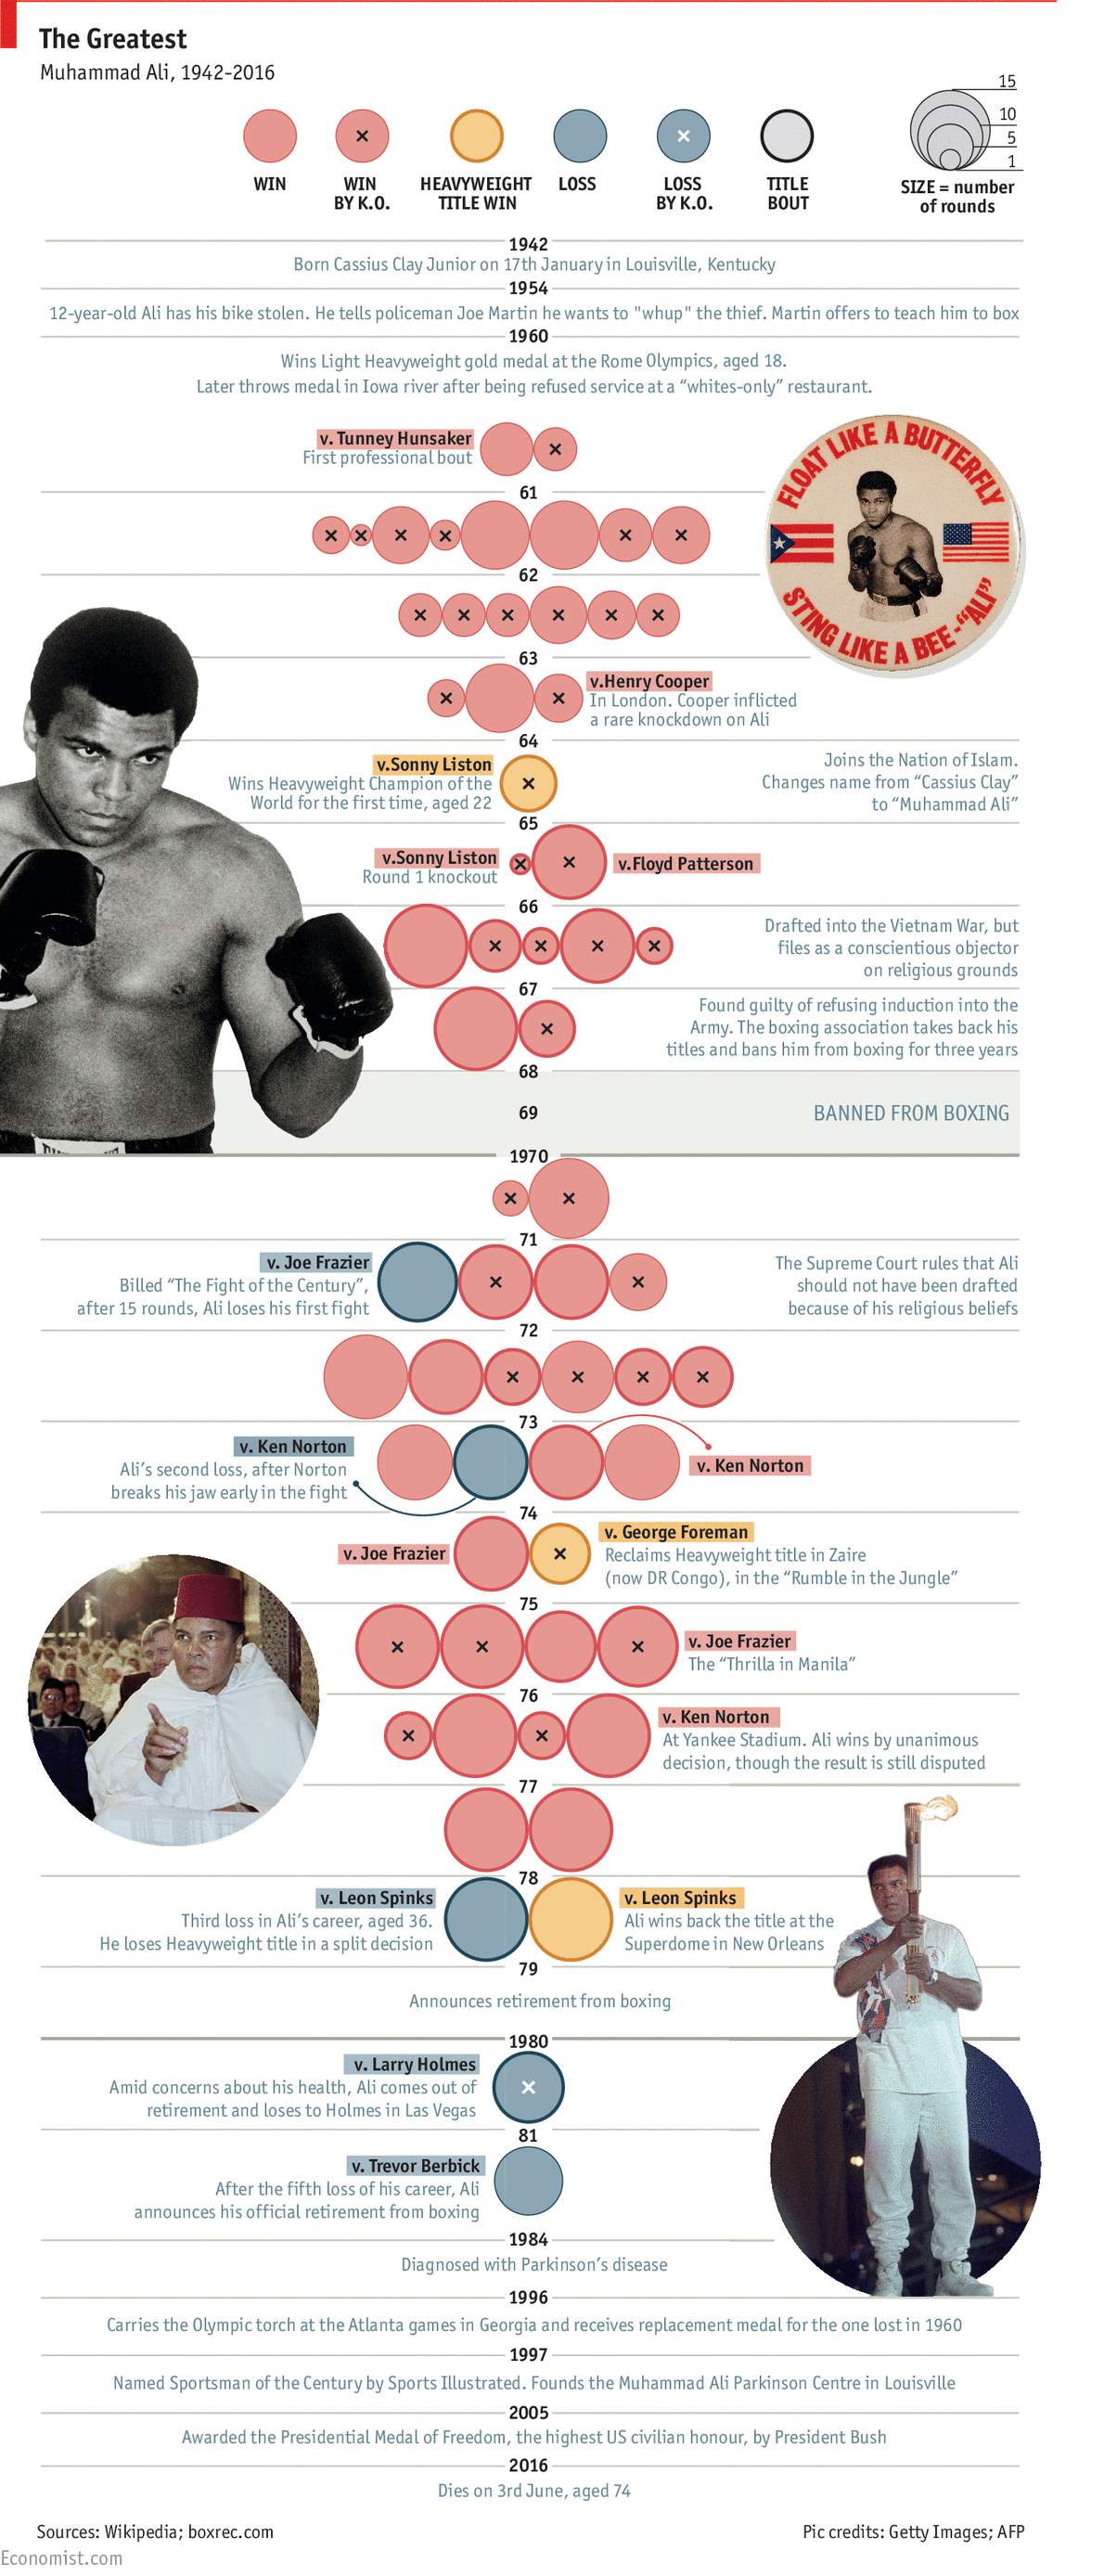 Muhammad Ali: The path to Greatest-ness - Timeline